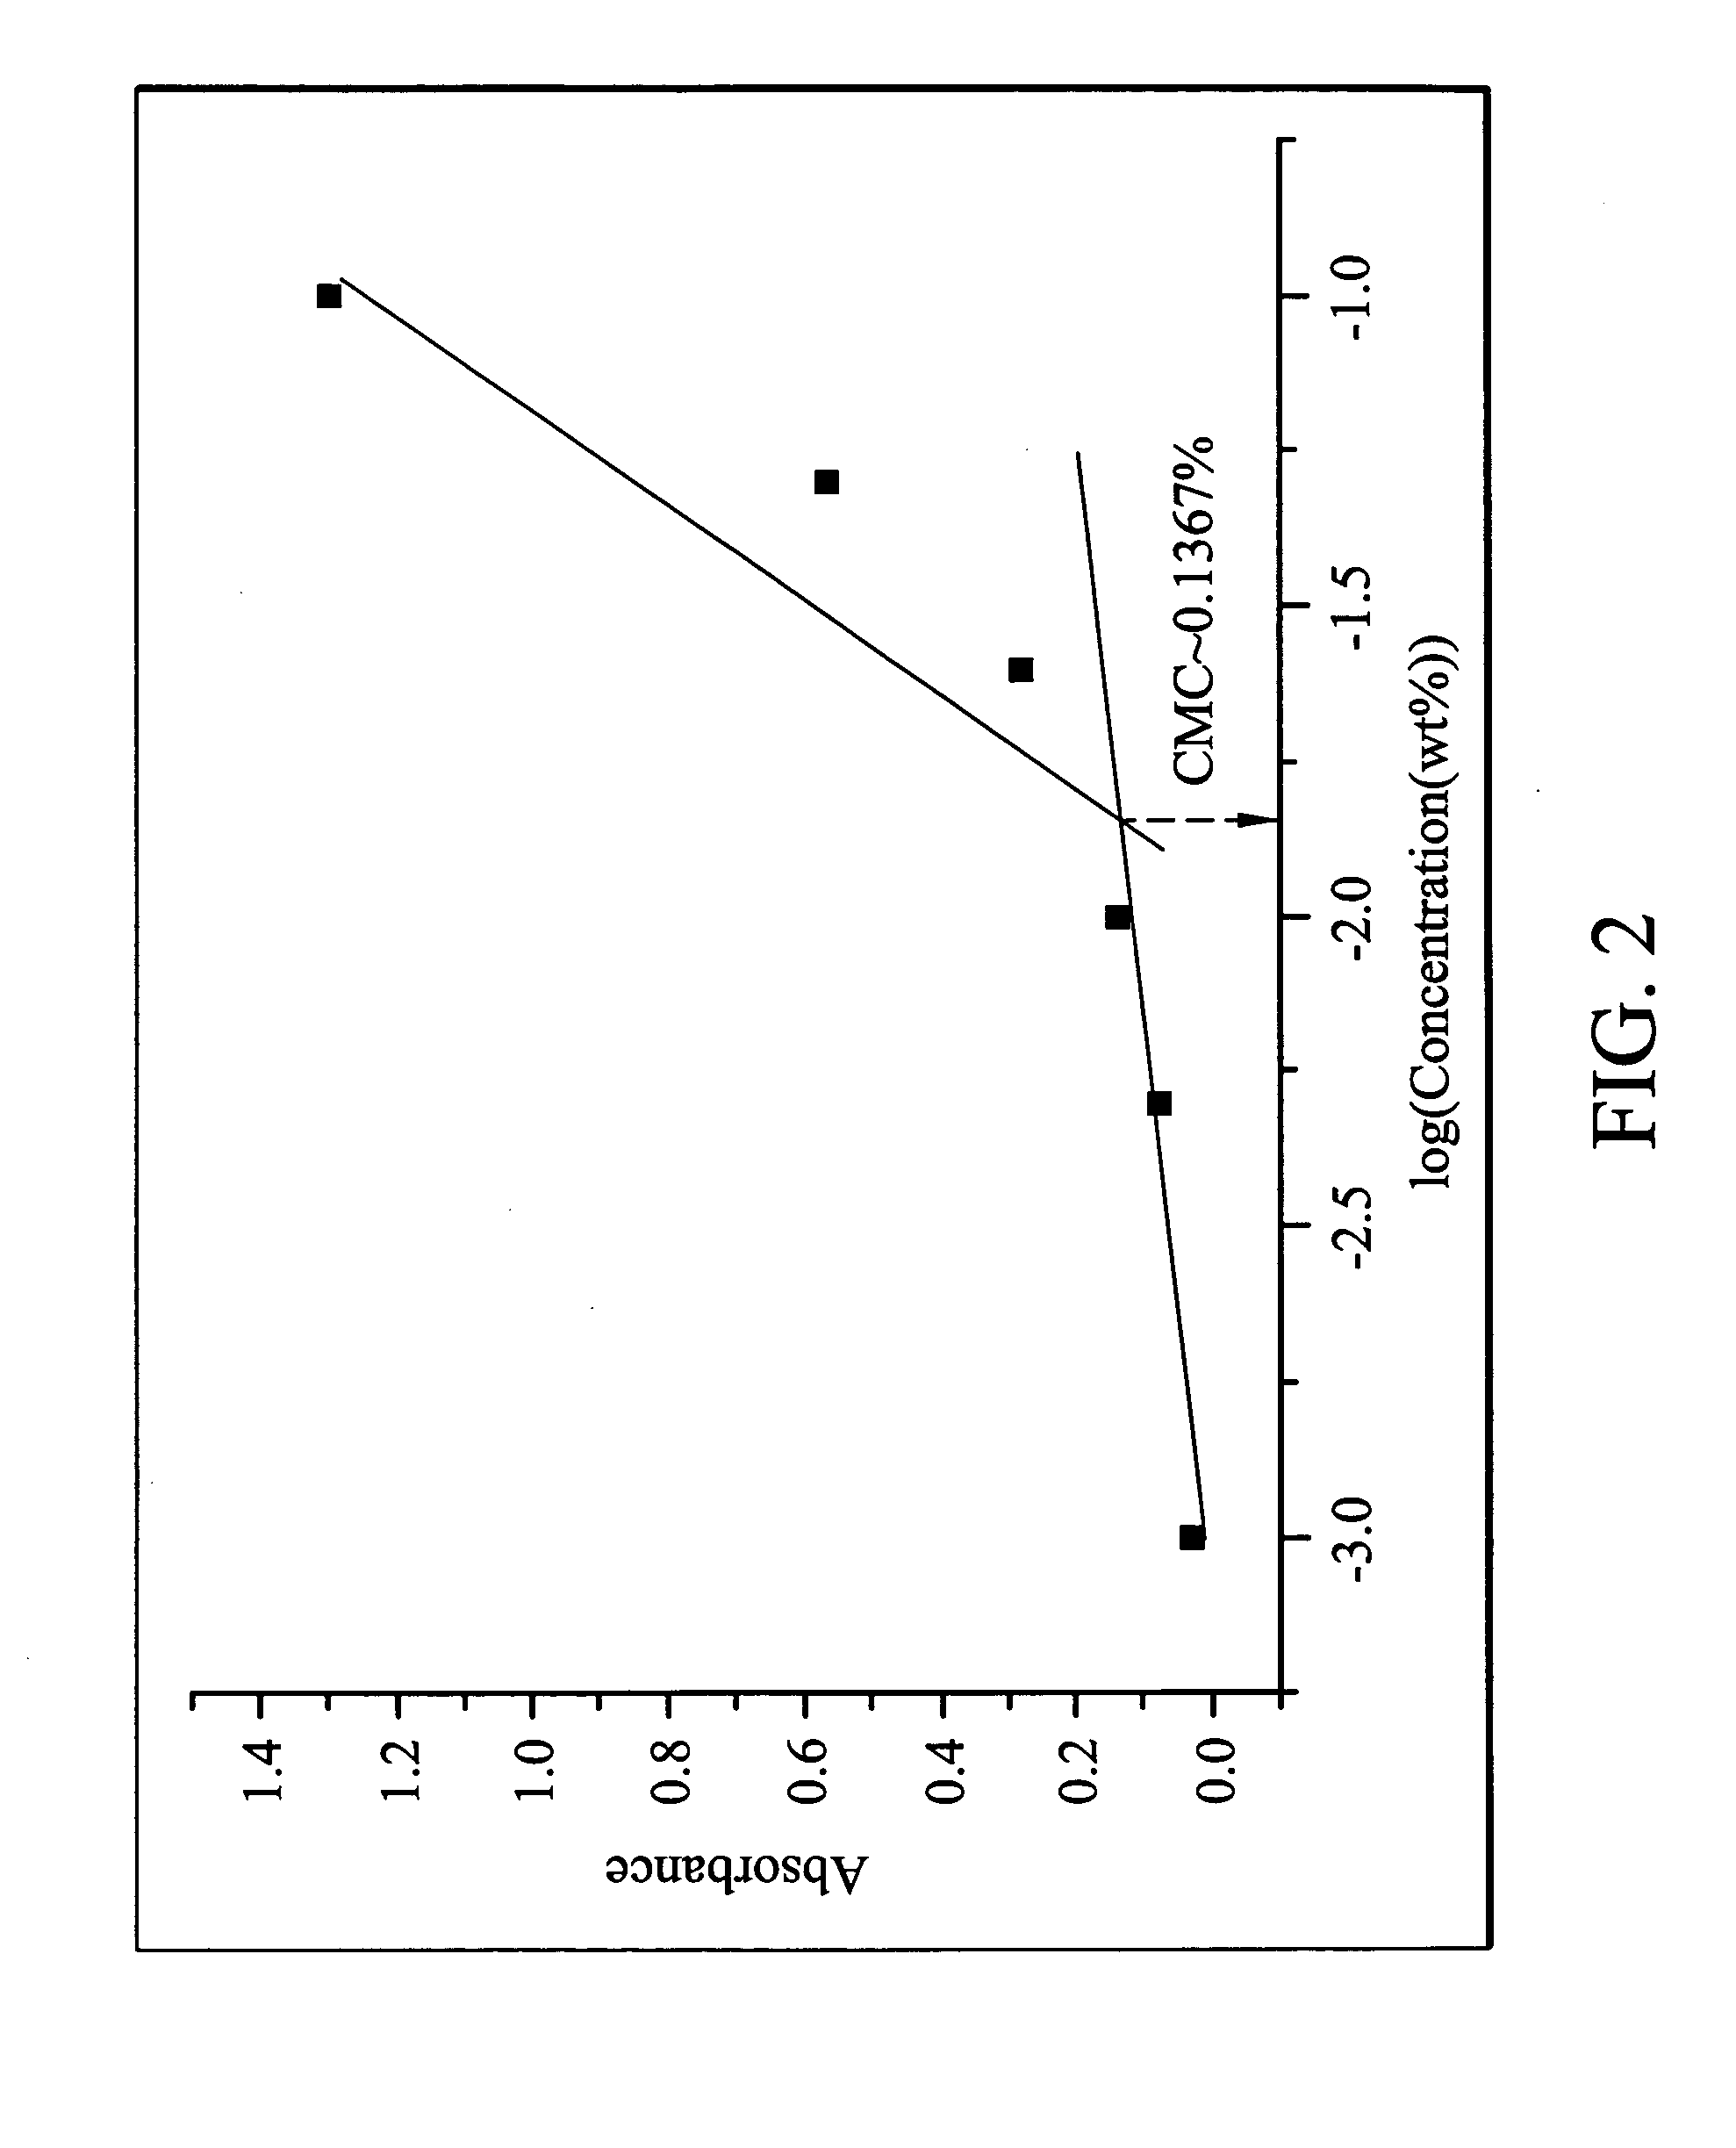 Biodegradable copolymer, and polymeric micelle composition containing the same